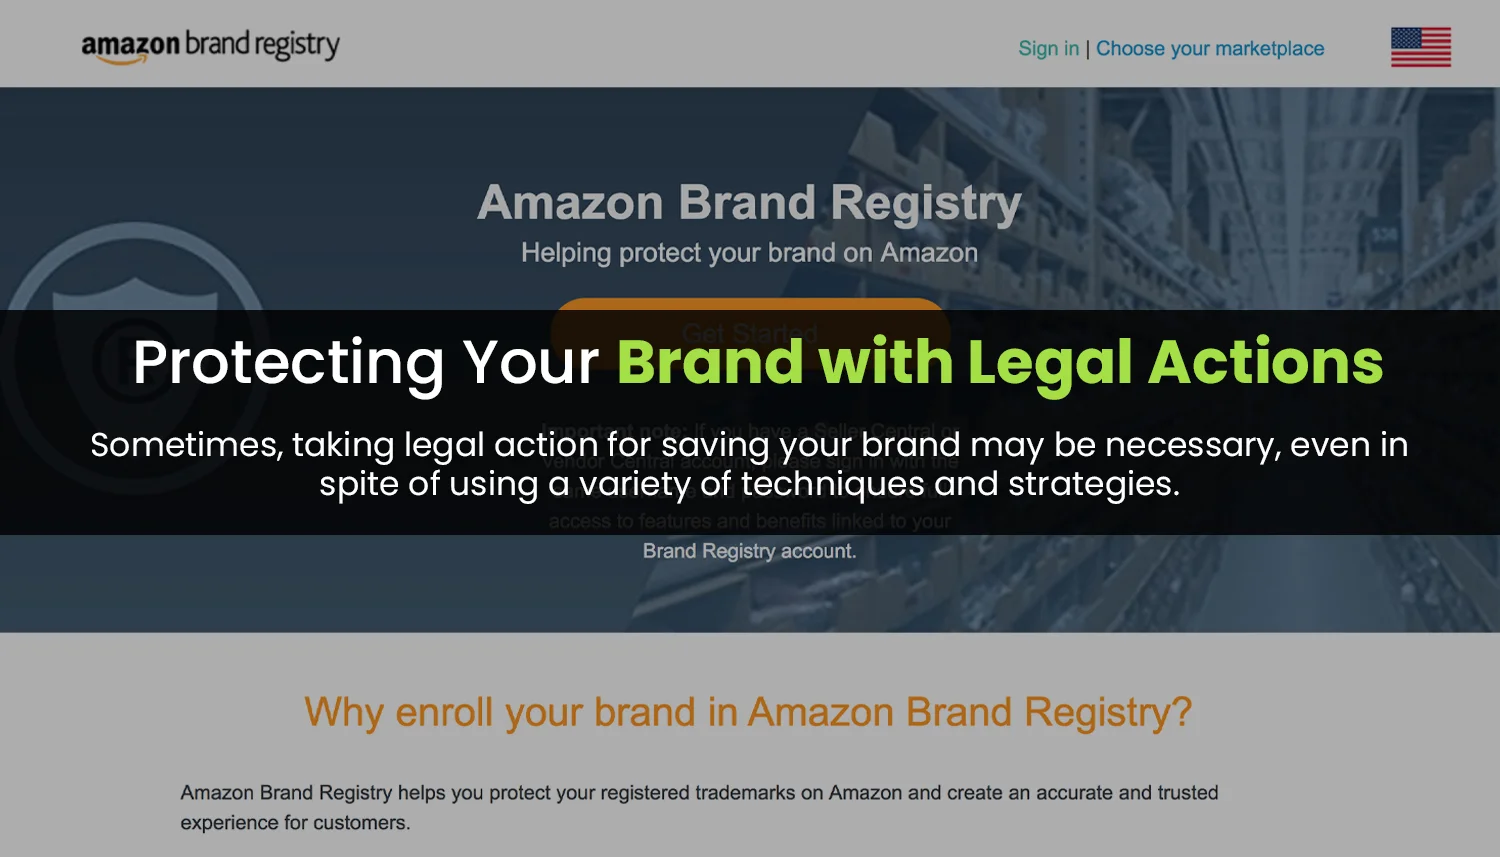 Protecting Your Brand with Legal Actions